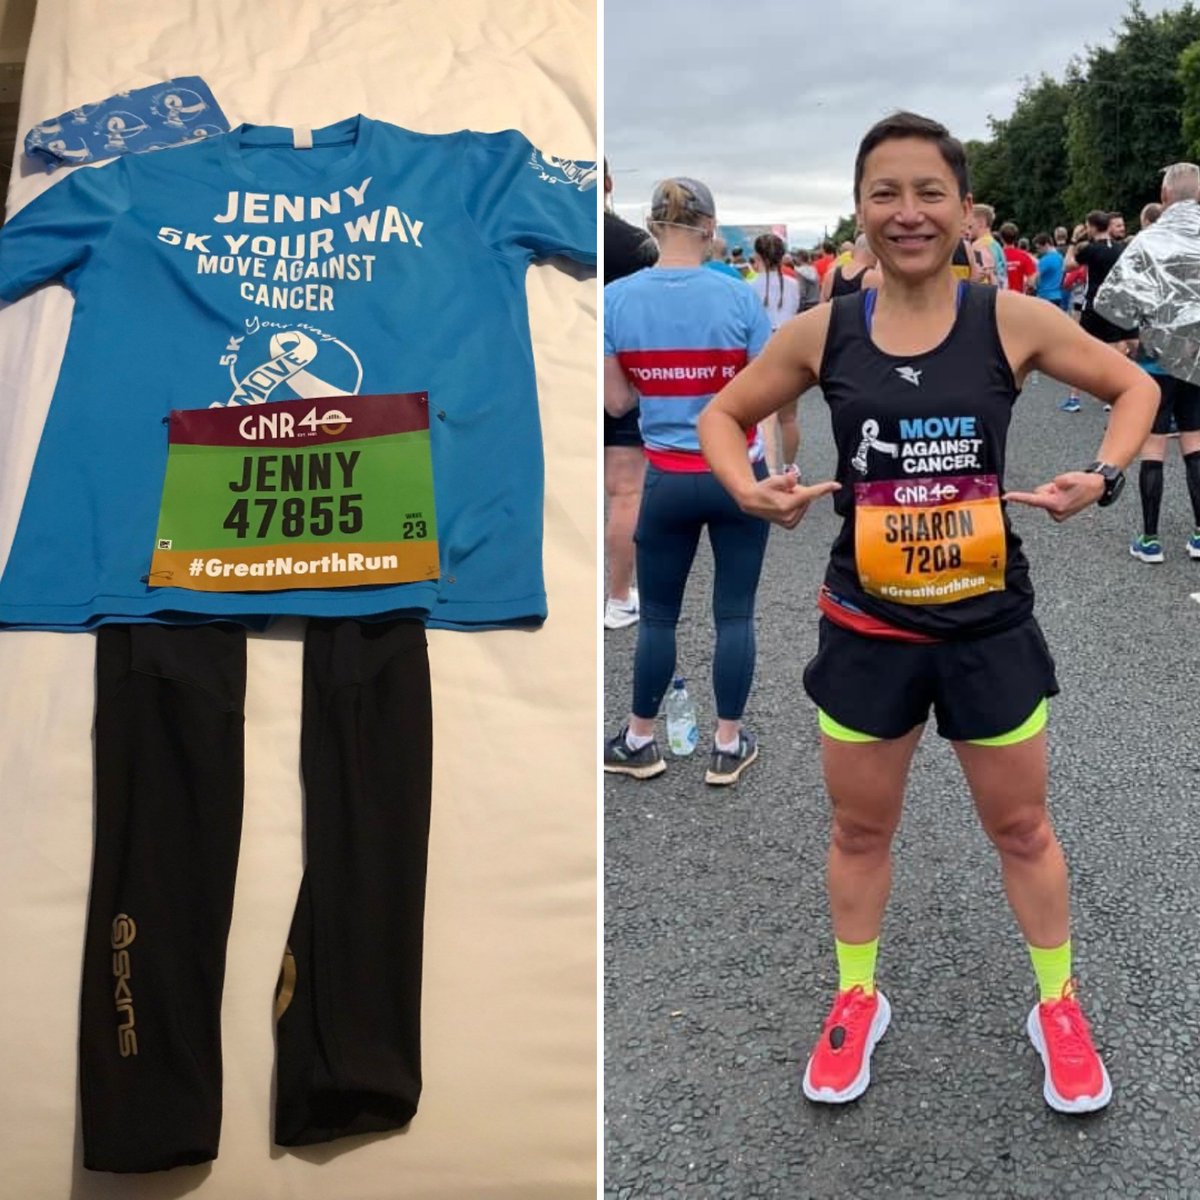 WELL DONE & THANK YOU to all of our runners who took part in The Great North Run last weekend - you absolutely smashed it!

Shout out to Jenny and Sharon for sending us these fab photos!

If you took part in last weekend’s event be sure to send us your photos/videos or tag us! https://t.co/TN55JrR8SF